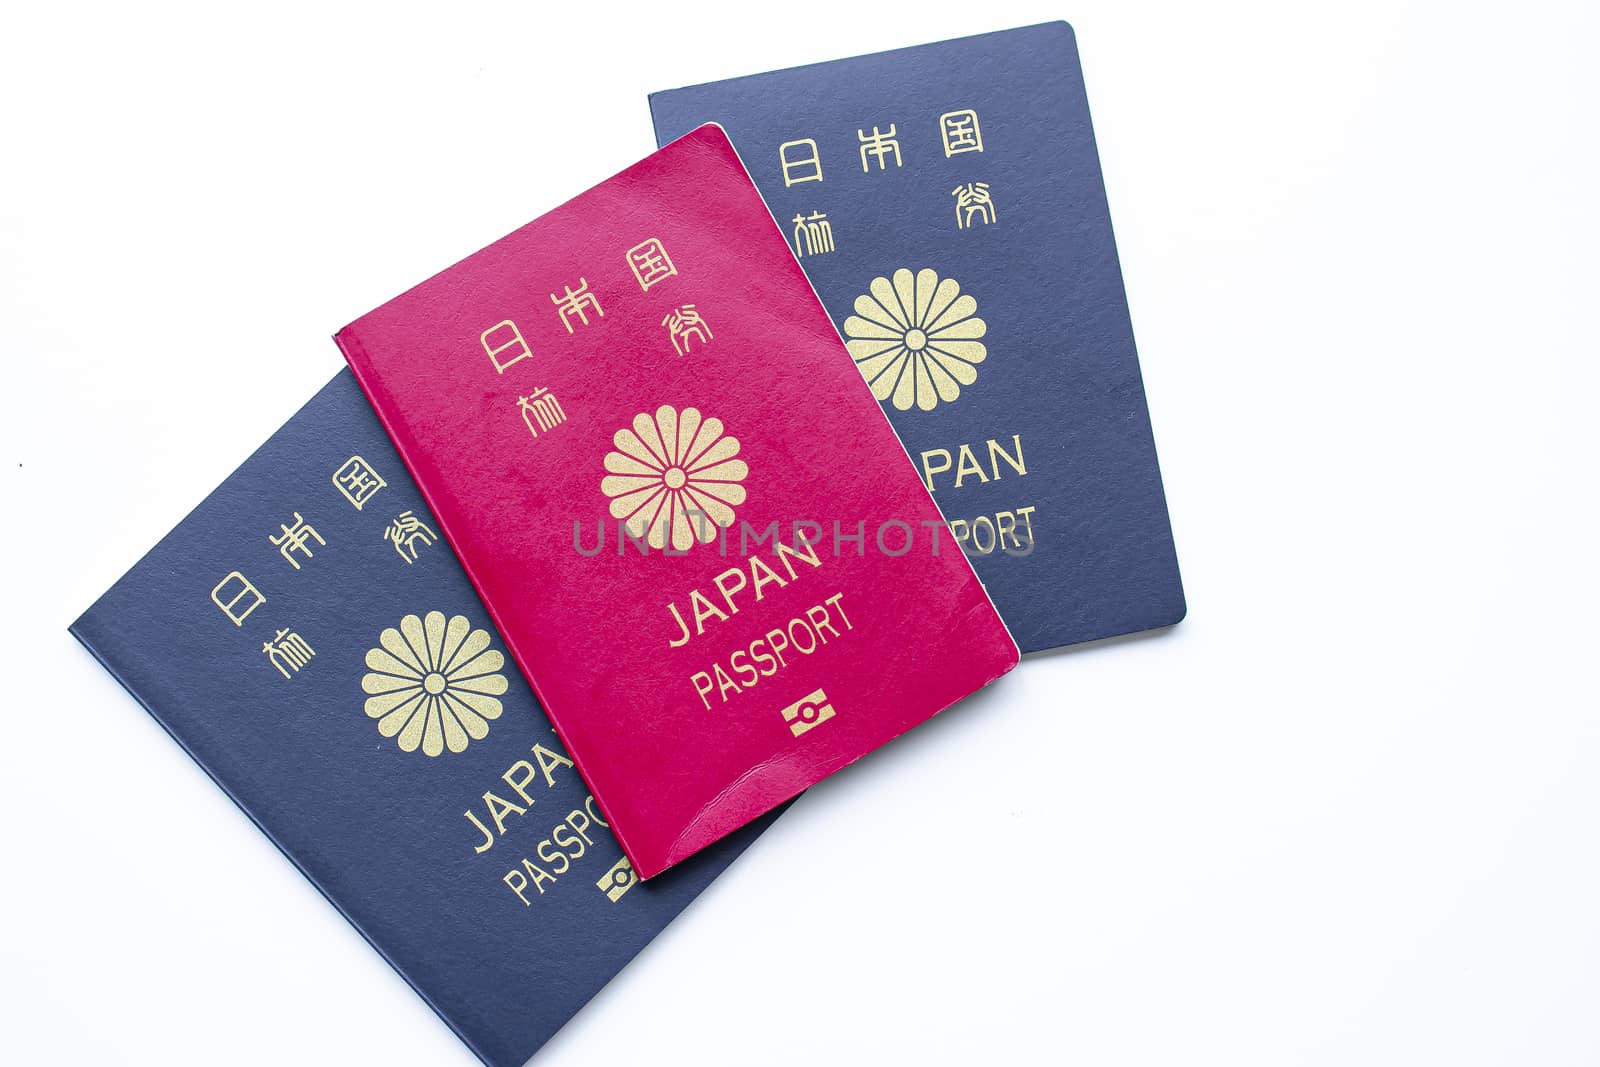 Japanese red and dark passports on a white background by oasisamuel